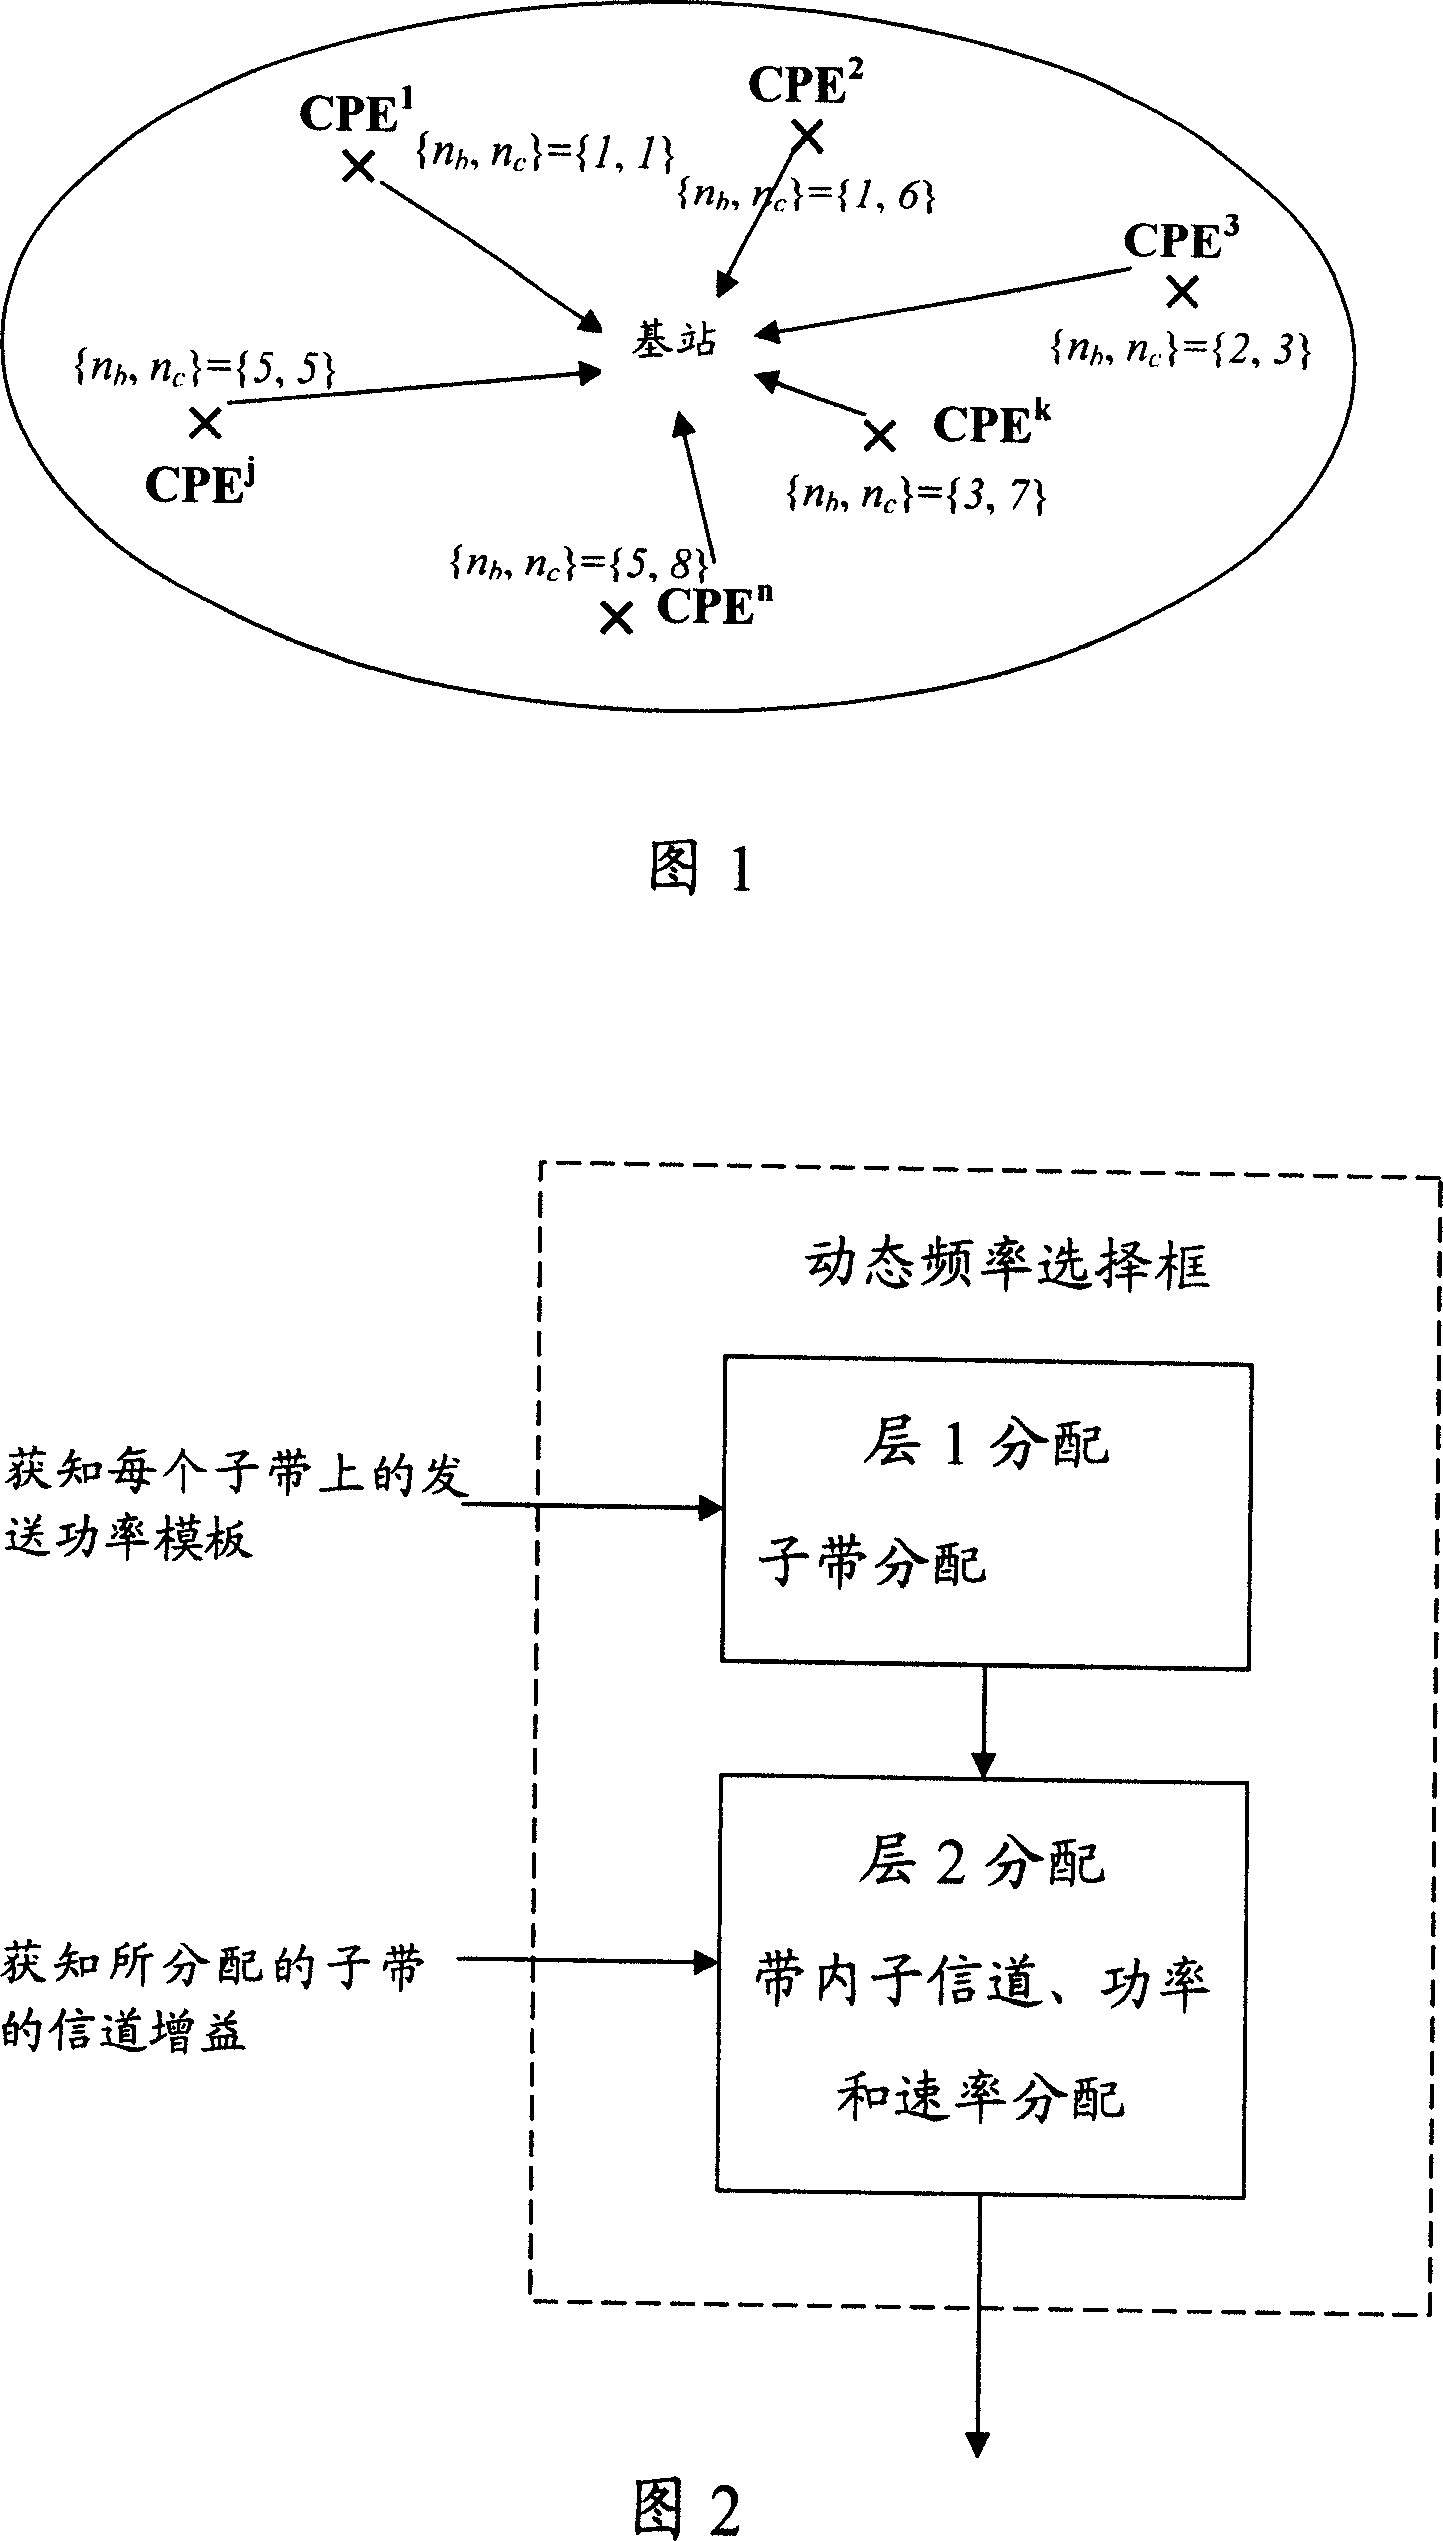 Wireless regional area network uplink resource distributing method and device using orthogonal frequency division multi access